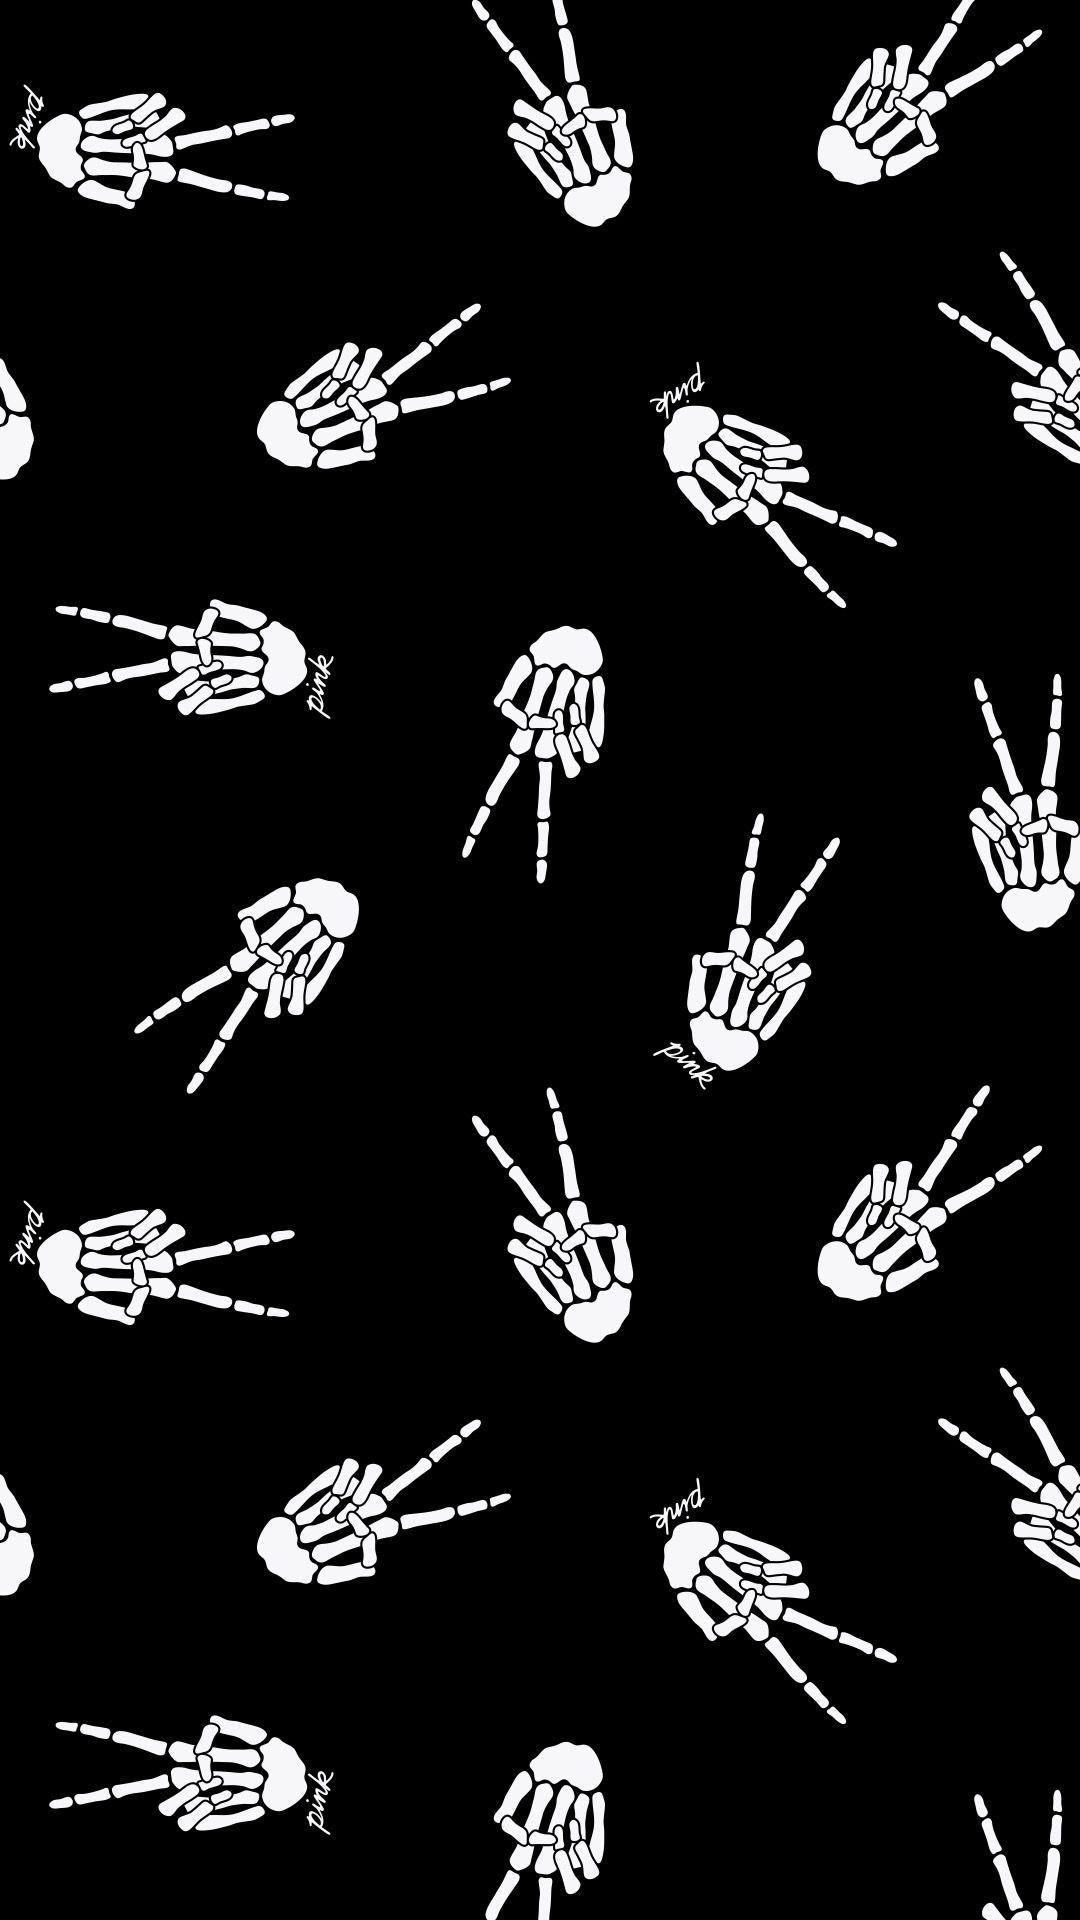 A pattern of white skeleton hands against a black background. Some of the hands are making the peace sign, some are making the middle finger gesture. - Halloween, ghost, gothic